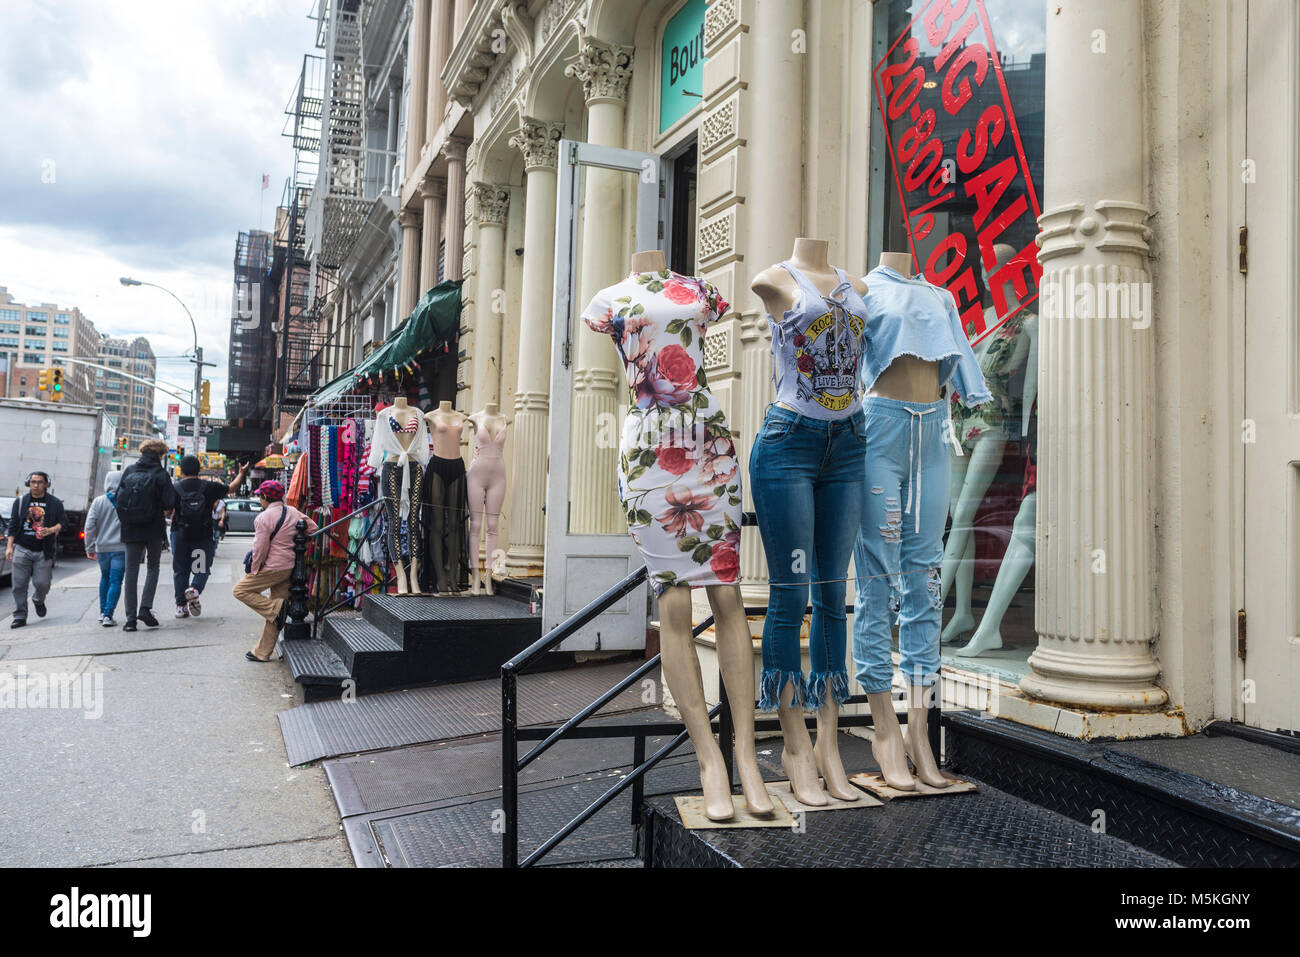 New York, NY, USA - 26 May 2017 - Women's clothing on sale on Canal Street Stock Photo